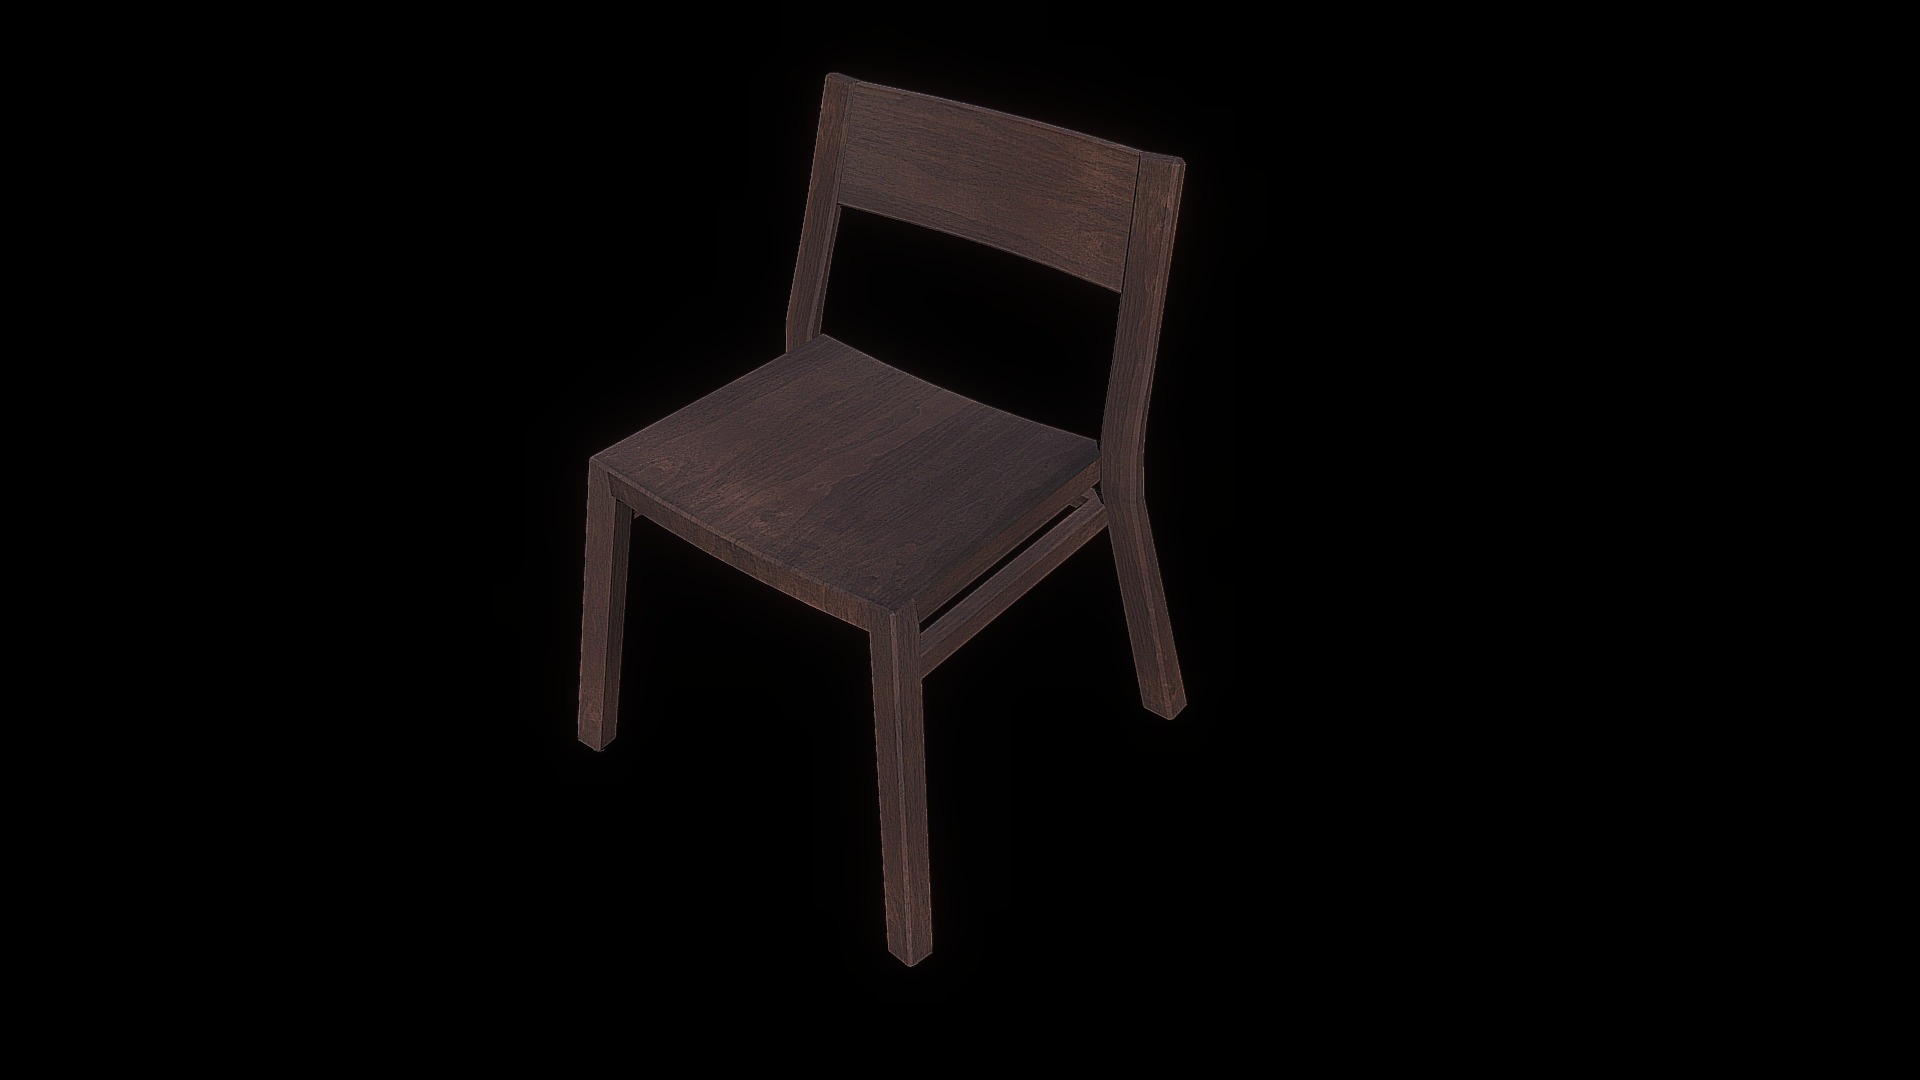 3D model Chair 1 - This is a 3D model of the Chair 1. The 3D model is about a chair with a cushion.